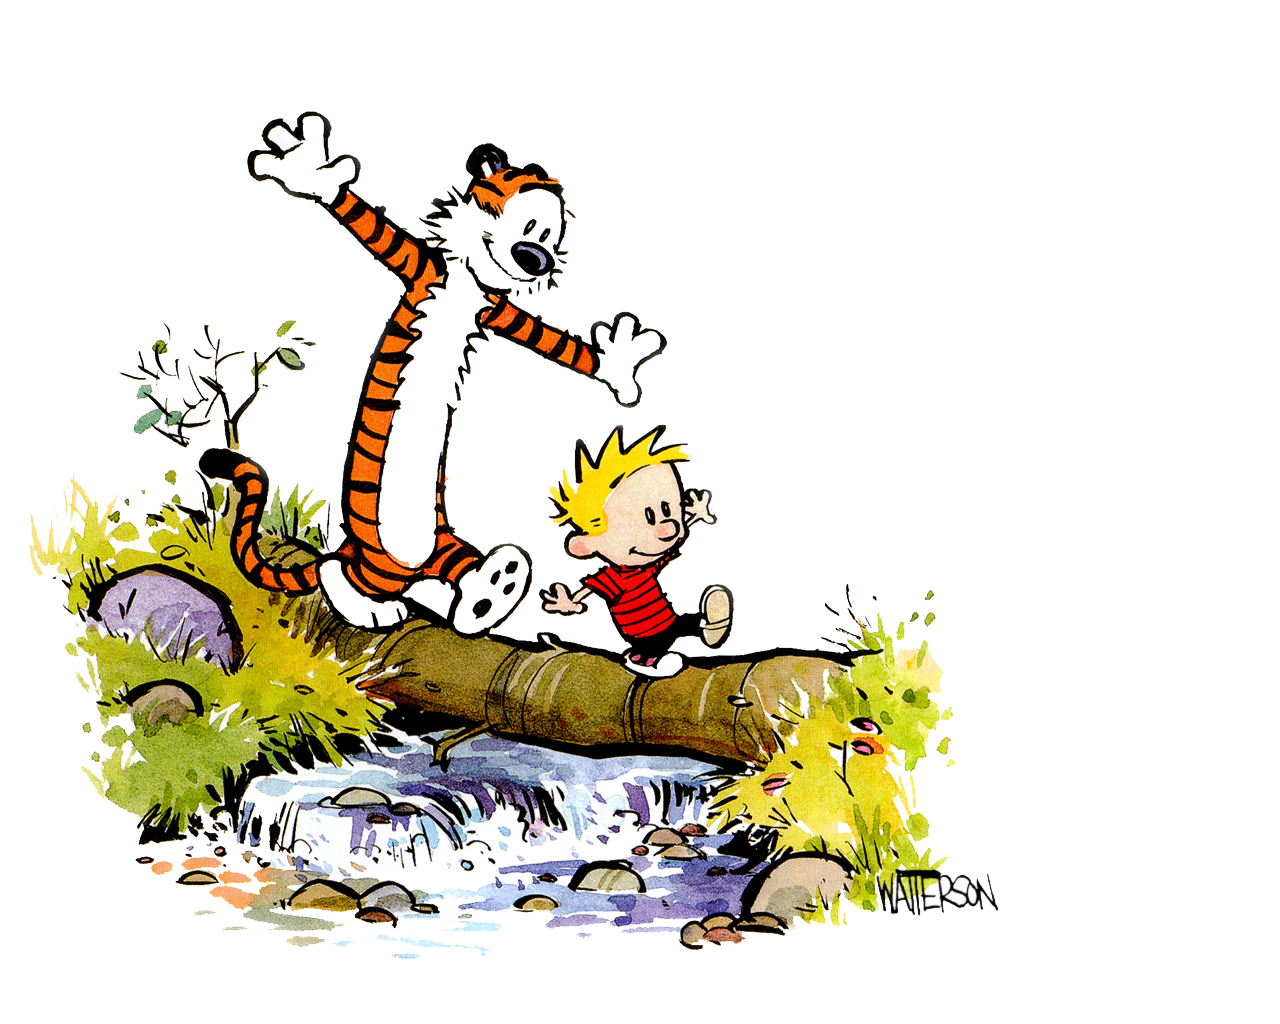 Download PNG image - Calvin And Hobbes PNG Image 